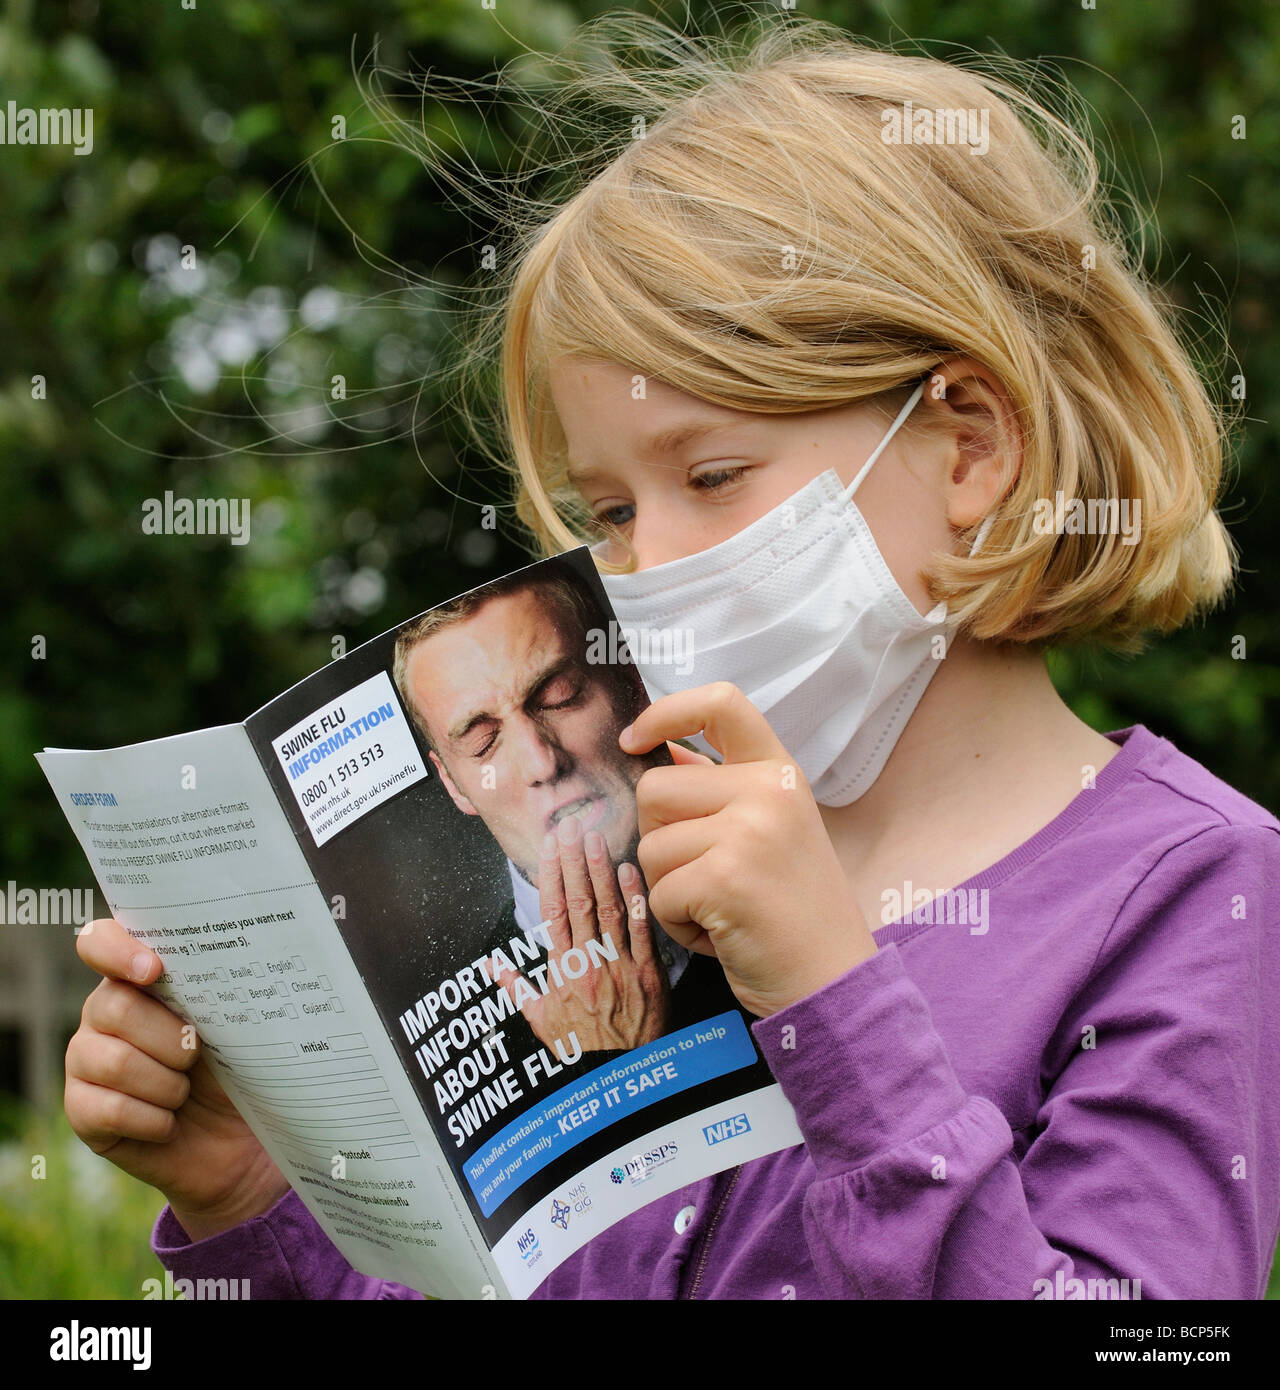 Swine flu information leaflet being read by a little girl wearing a medical mask Stock Photo